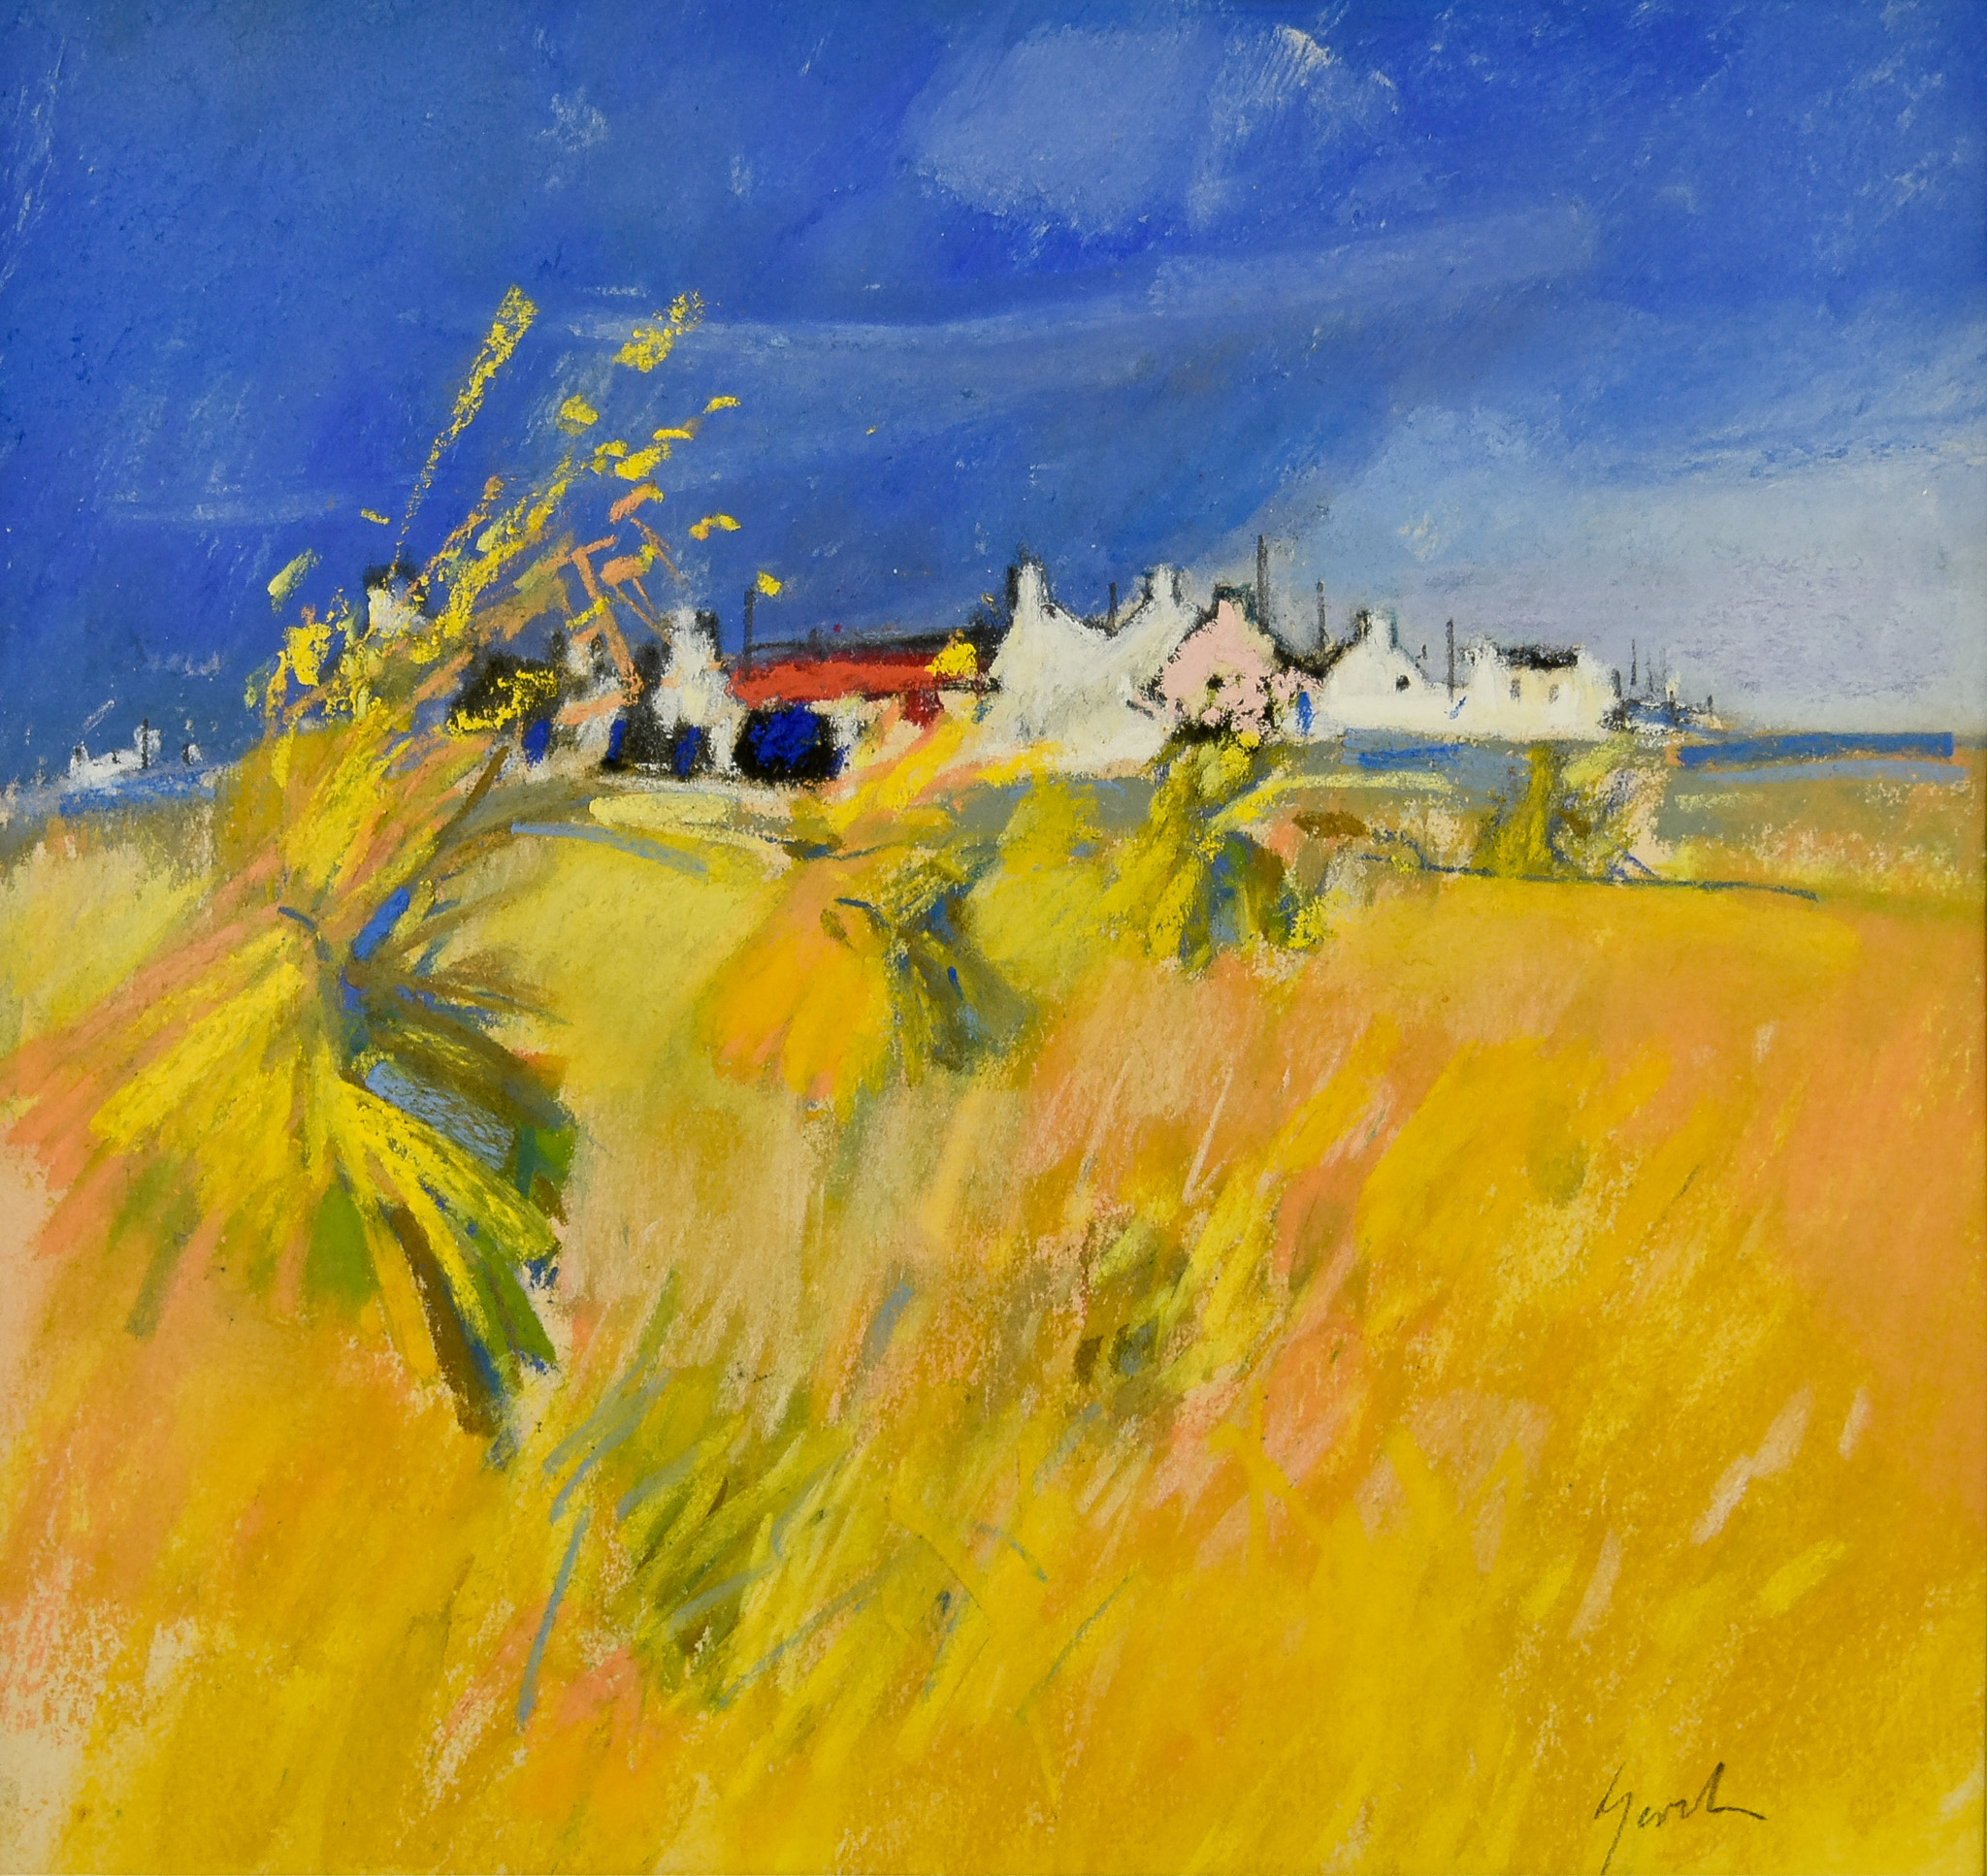 ***Anne Gordon (Born 1941) - Watercolour and pastel – “Cornfields”, signed and dated 1997, 7.75ins x